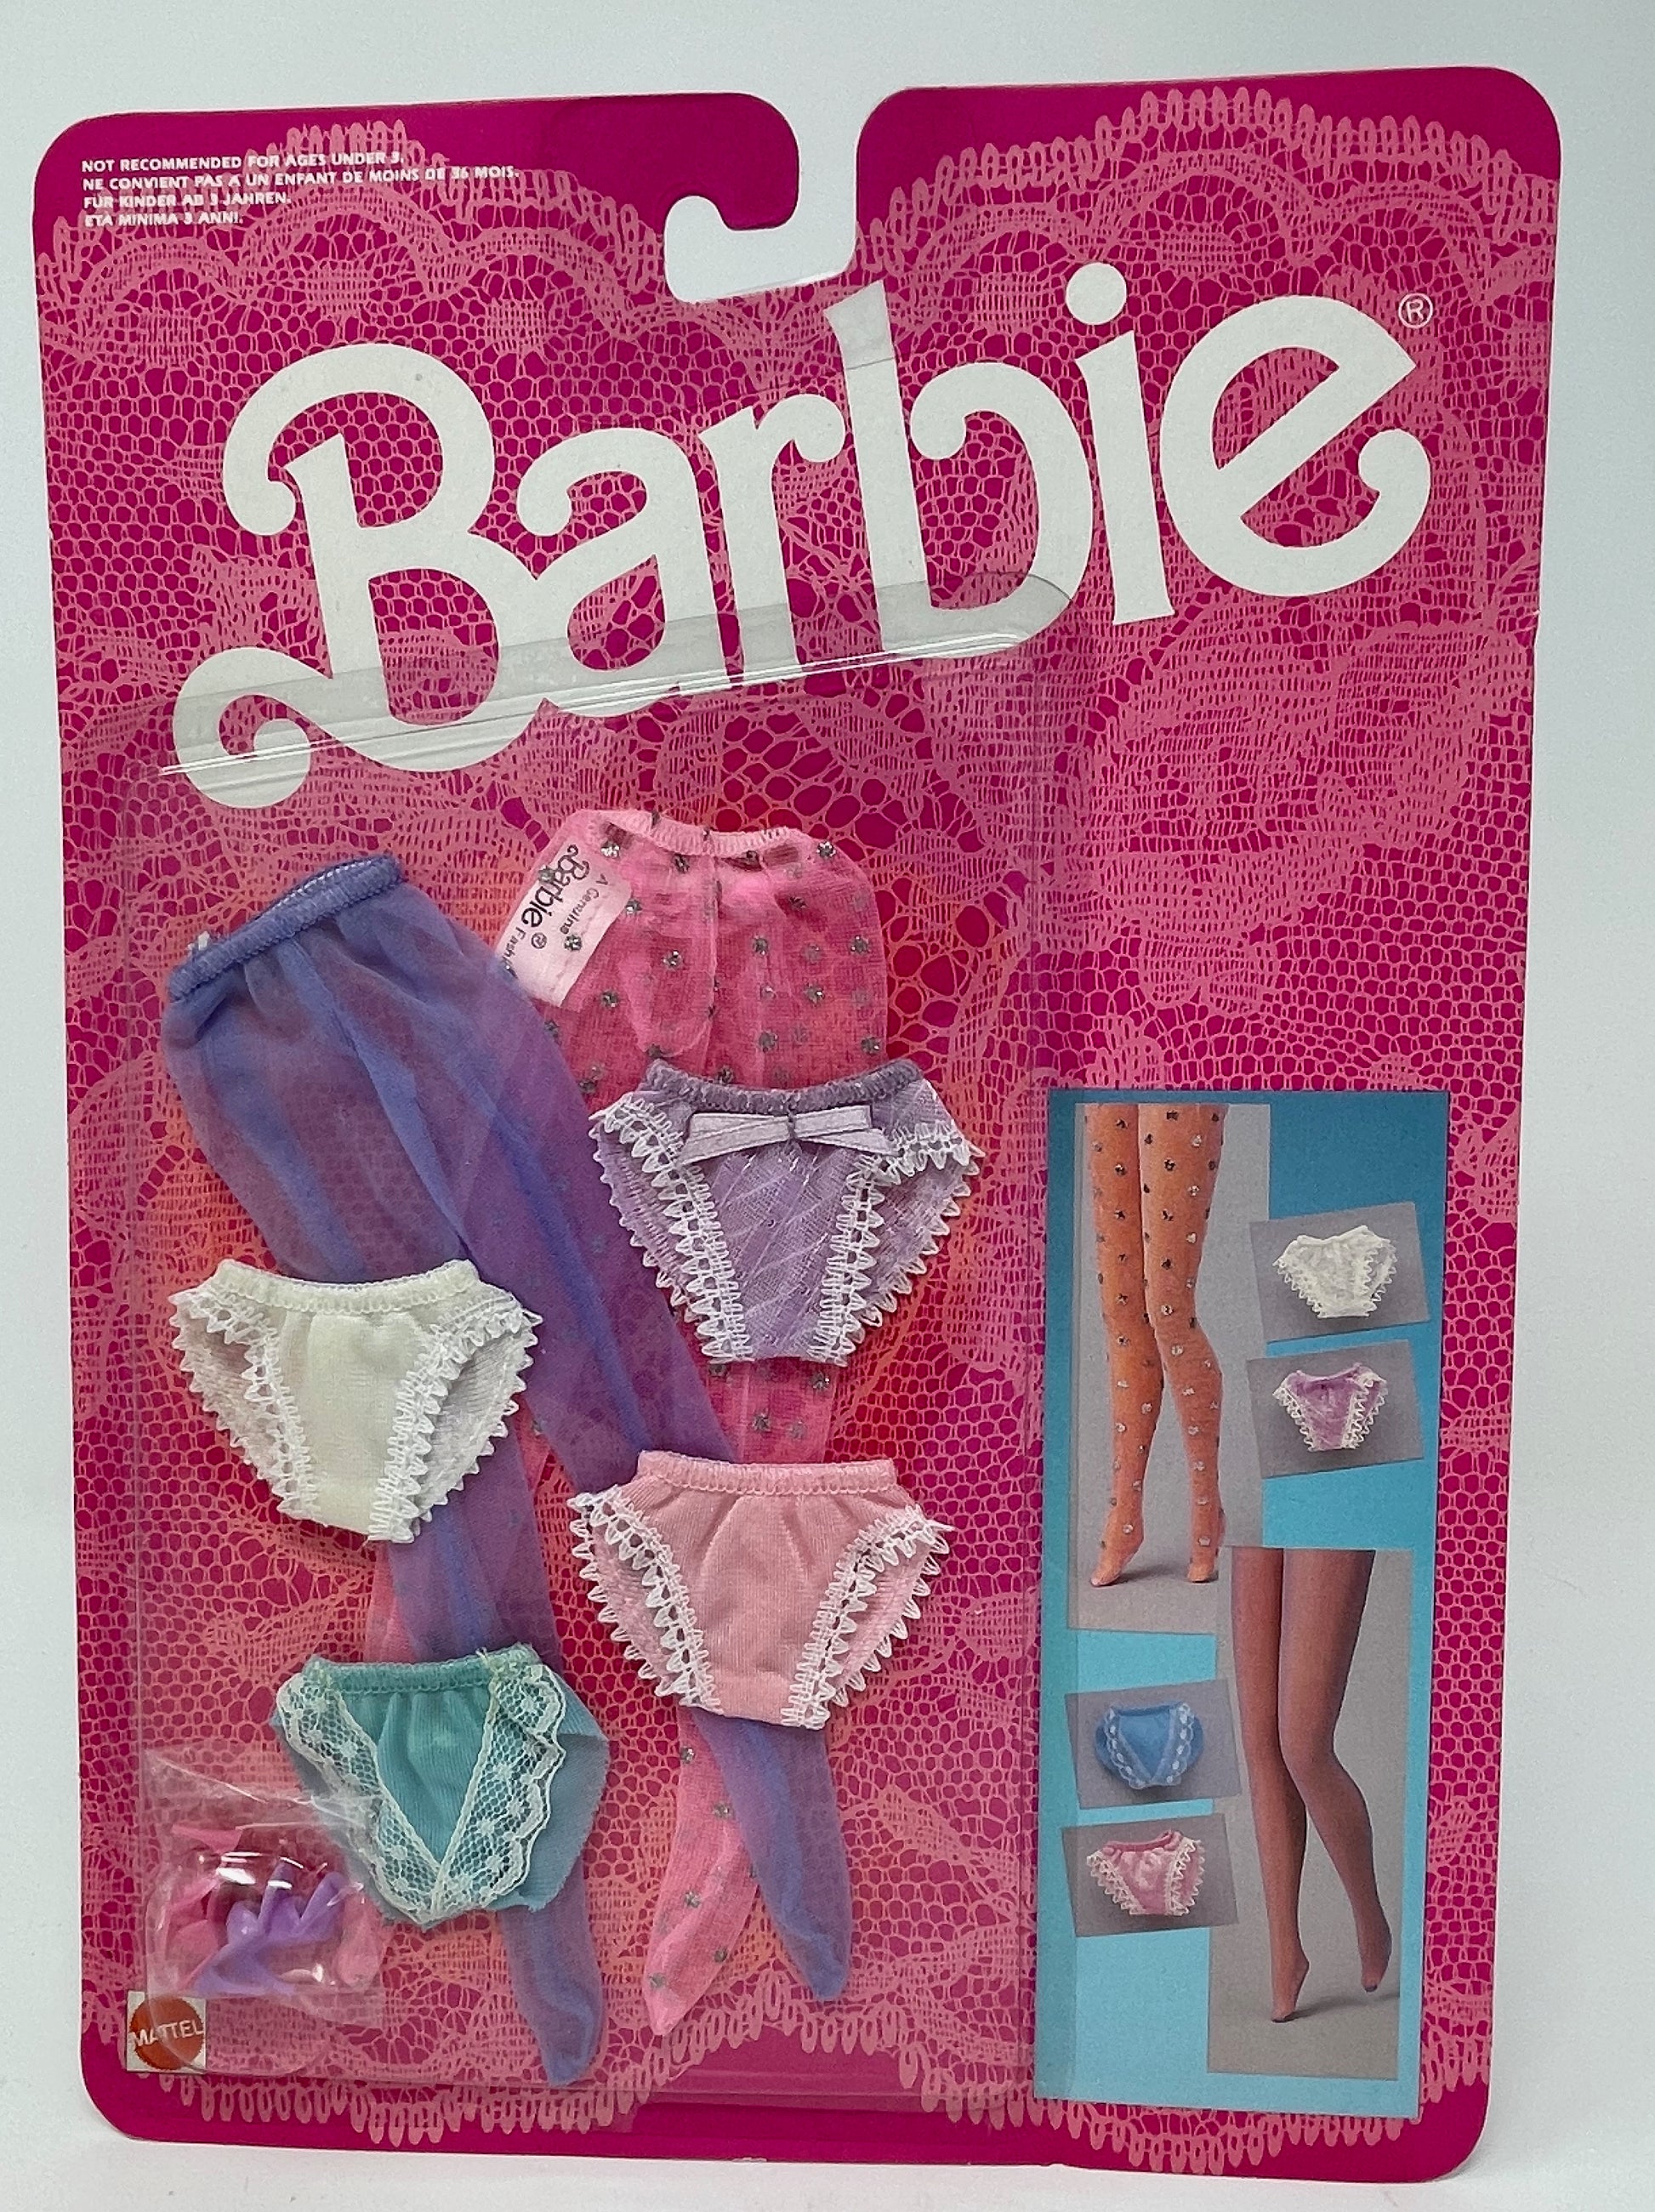 BARBIE - FANCY FRILLS LINGERIE #3181 - TIGHTS/PANTIES/SHOES - MATTEL 1 –  Mr. Joe's Really Big Toys & Collectibles